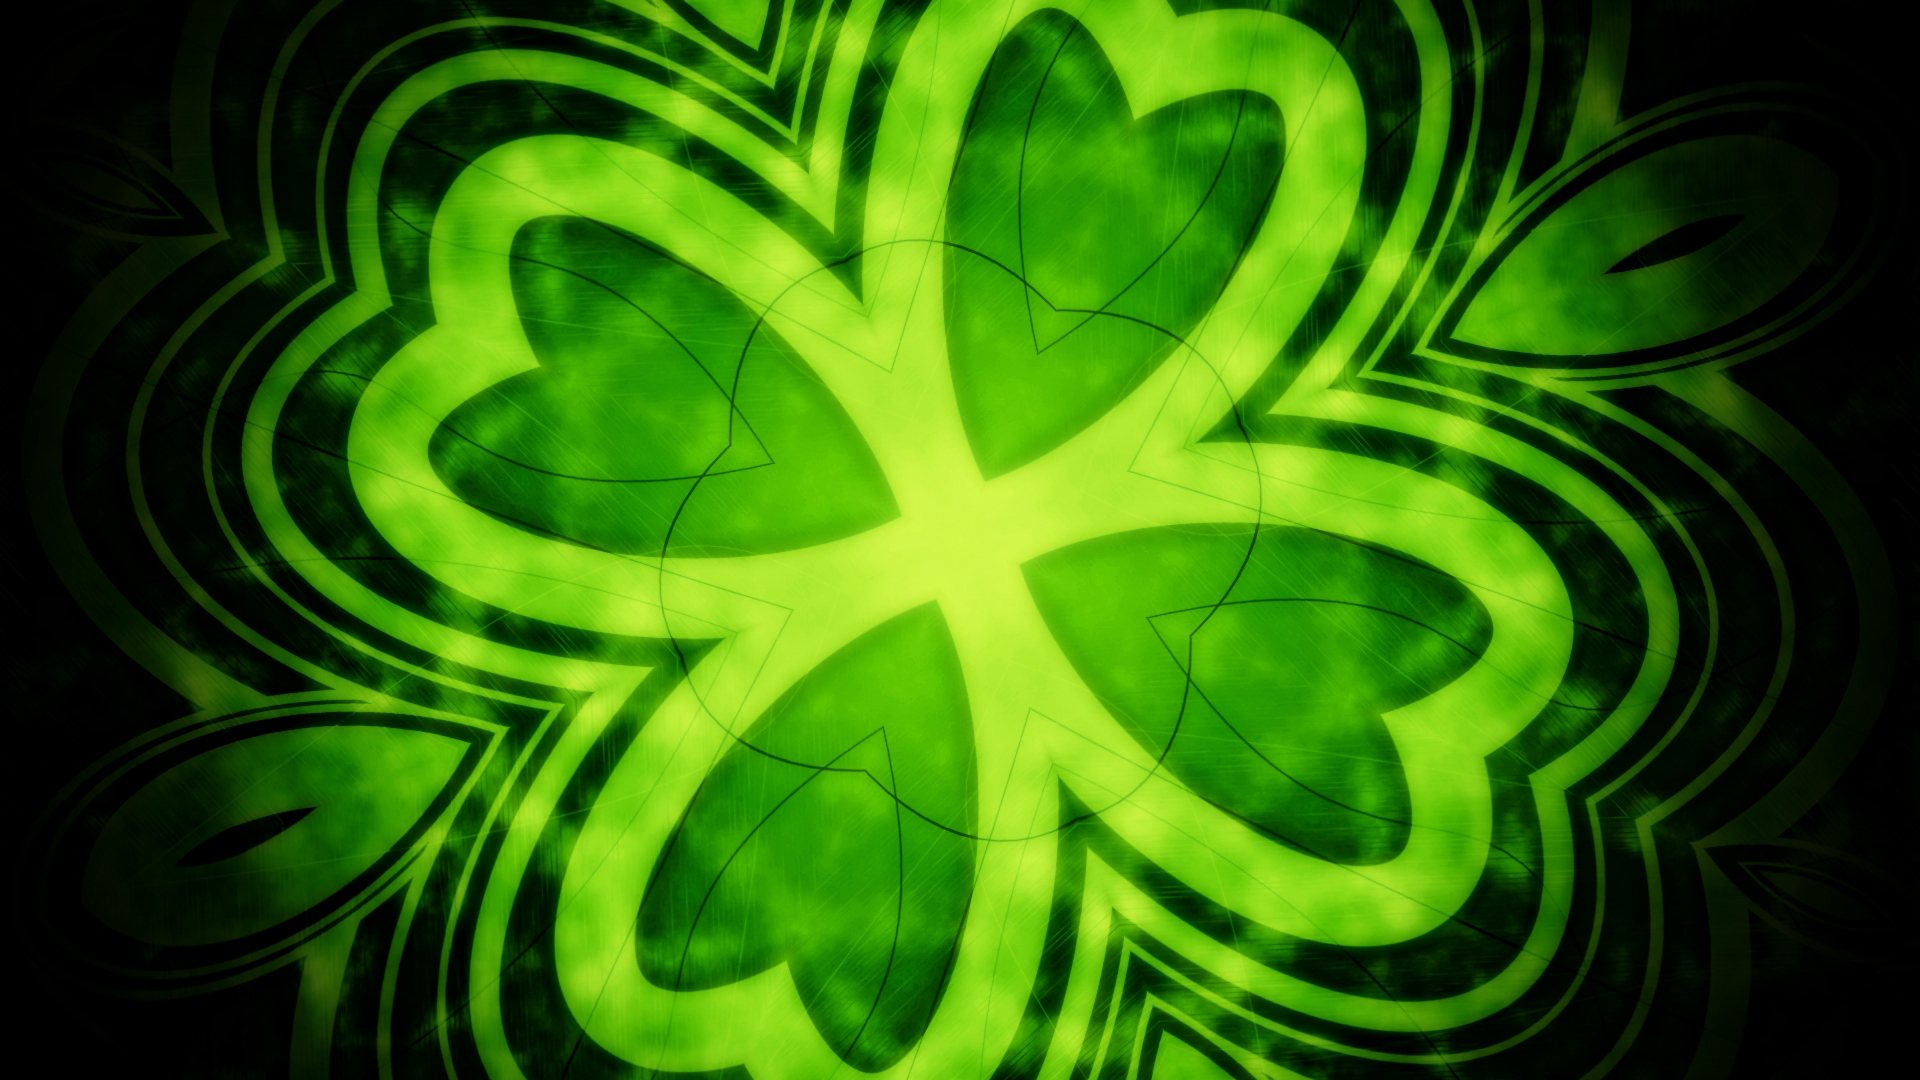 15 lucky Android wallpapers for St. Patrick's Day | AndroidGuys